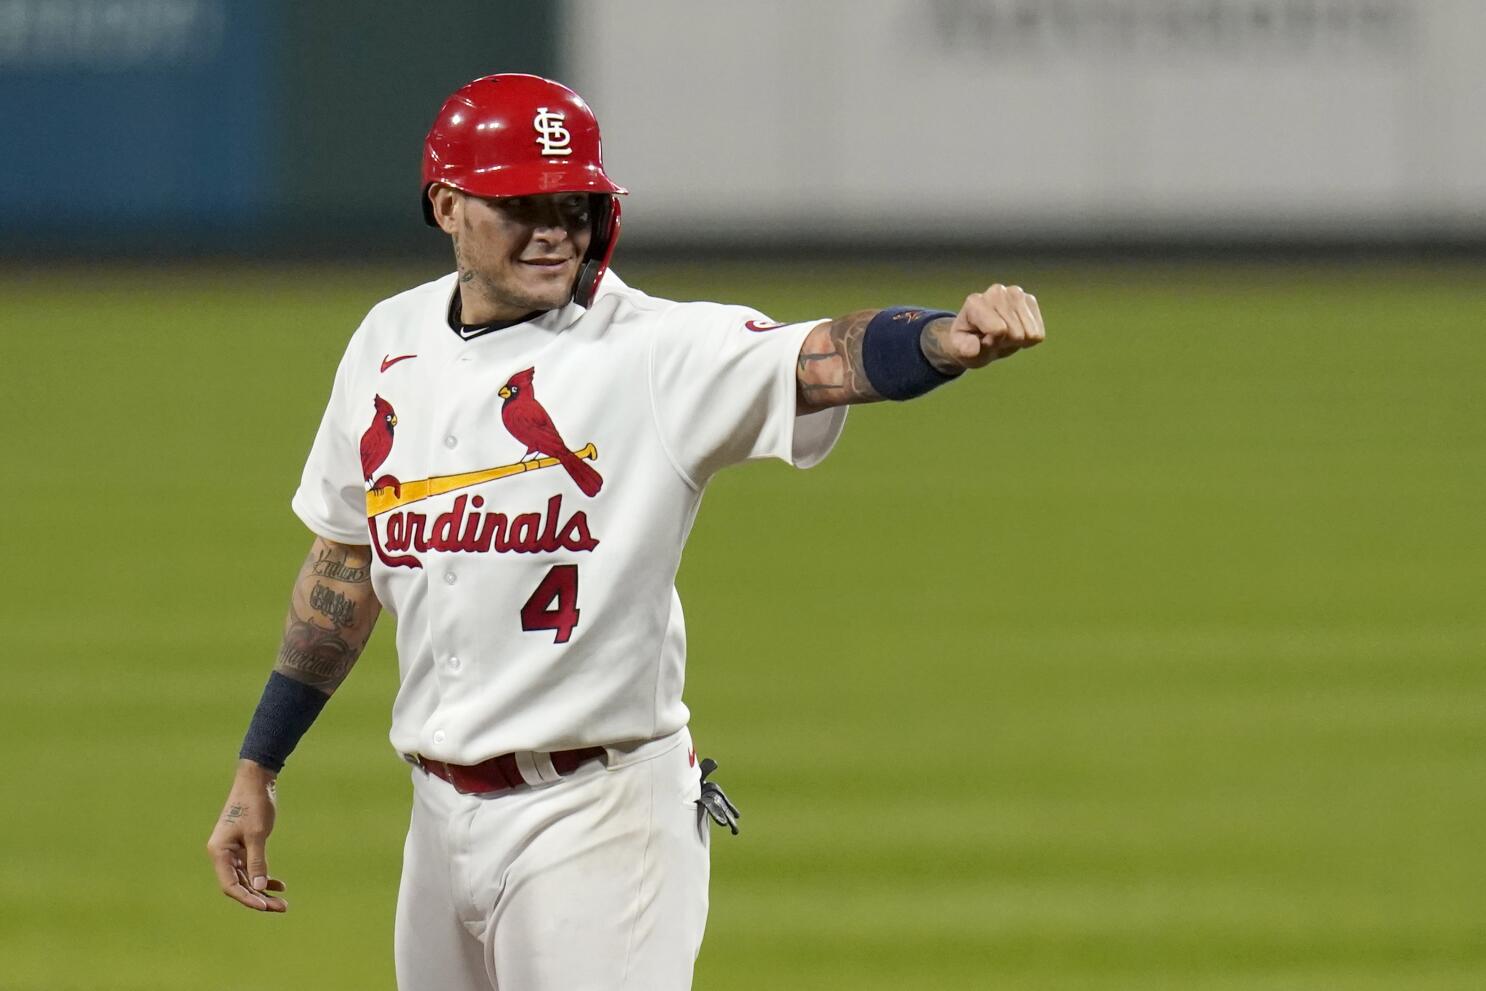 The Second Career Year Of Yadier Molina 